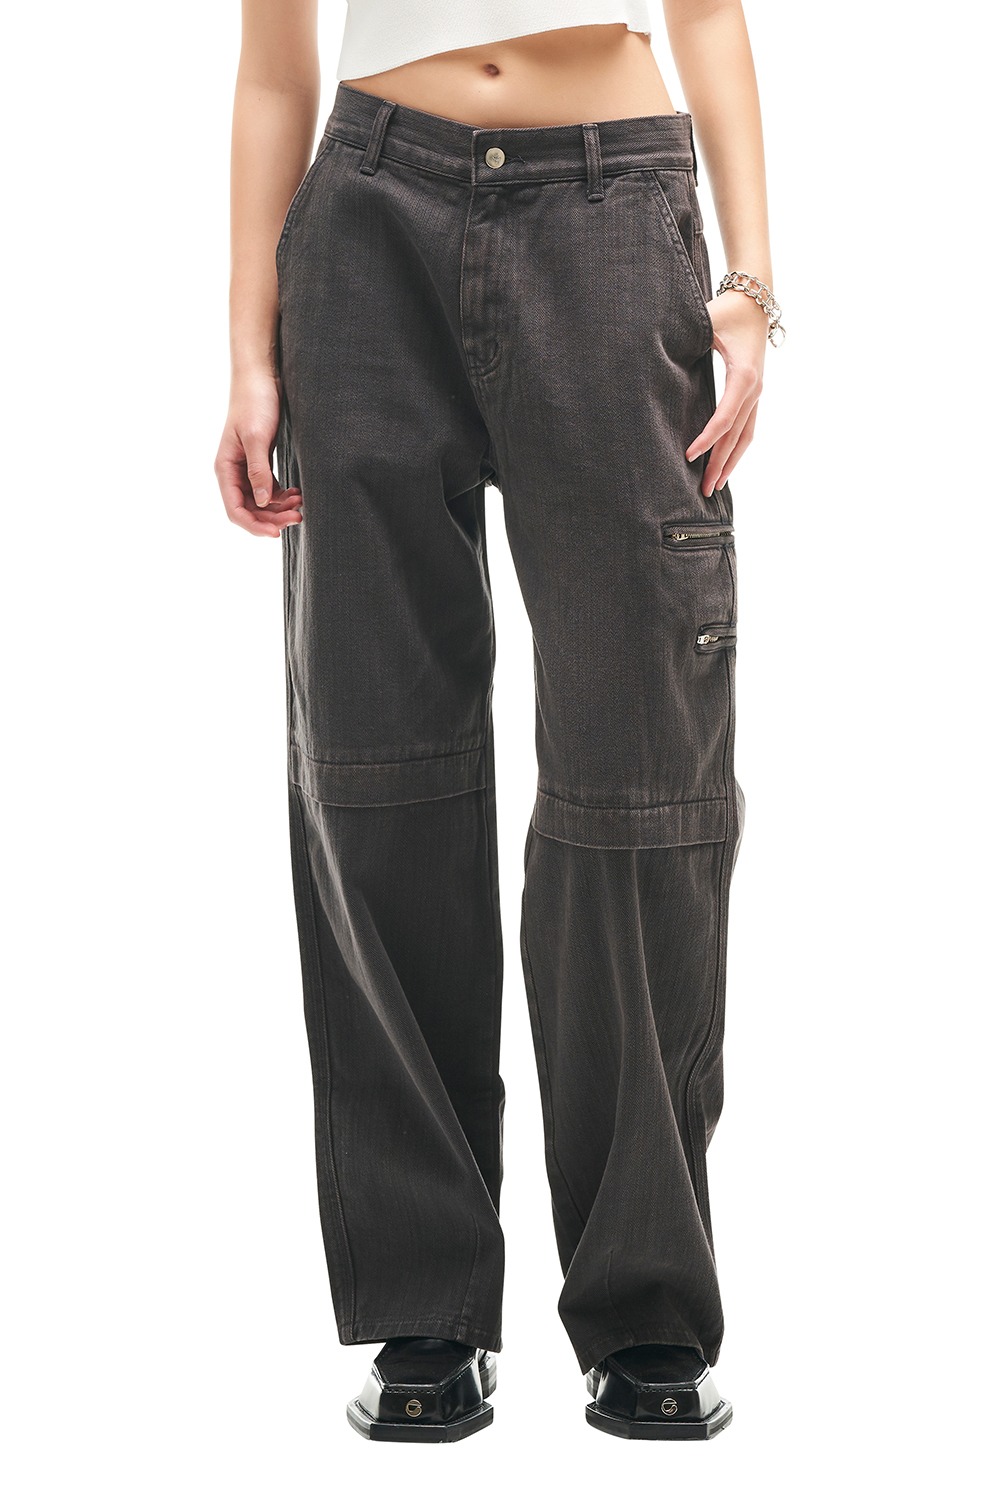 KENNY COLOR WASHED JEANS (CHARCOAL)